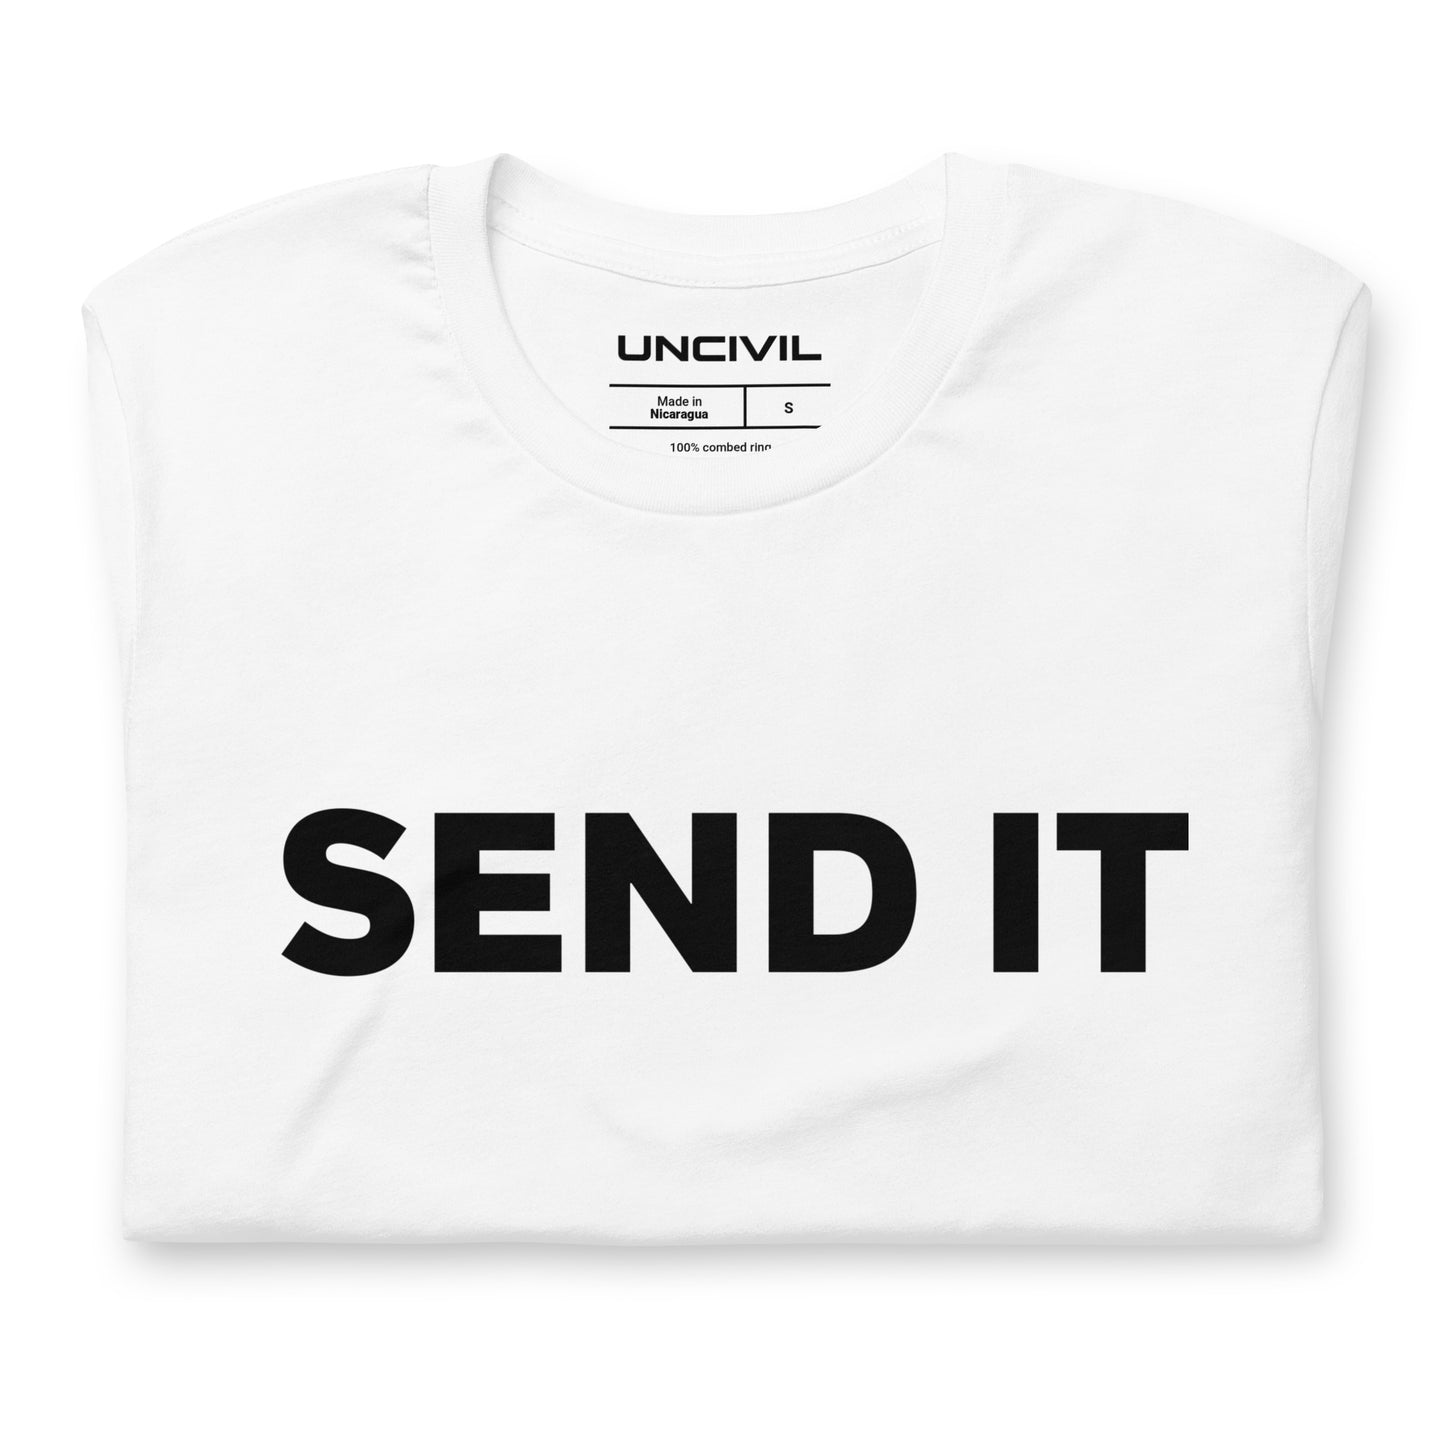 Send It is often used as an expression to indicate taking action or proceeding with a plan. White men's shirt.